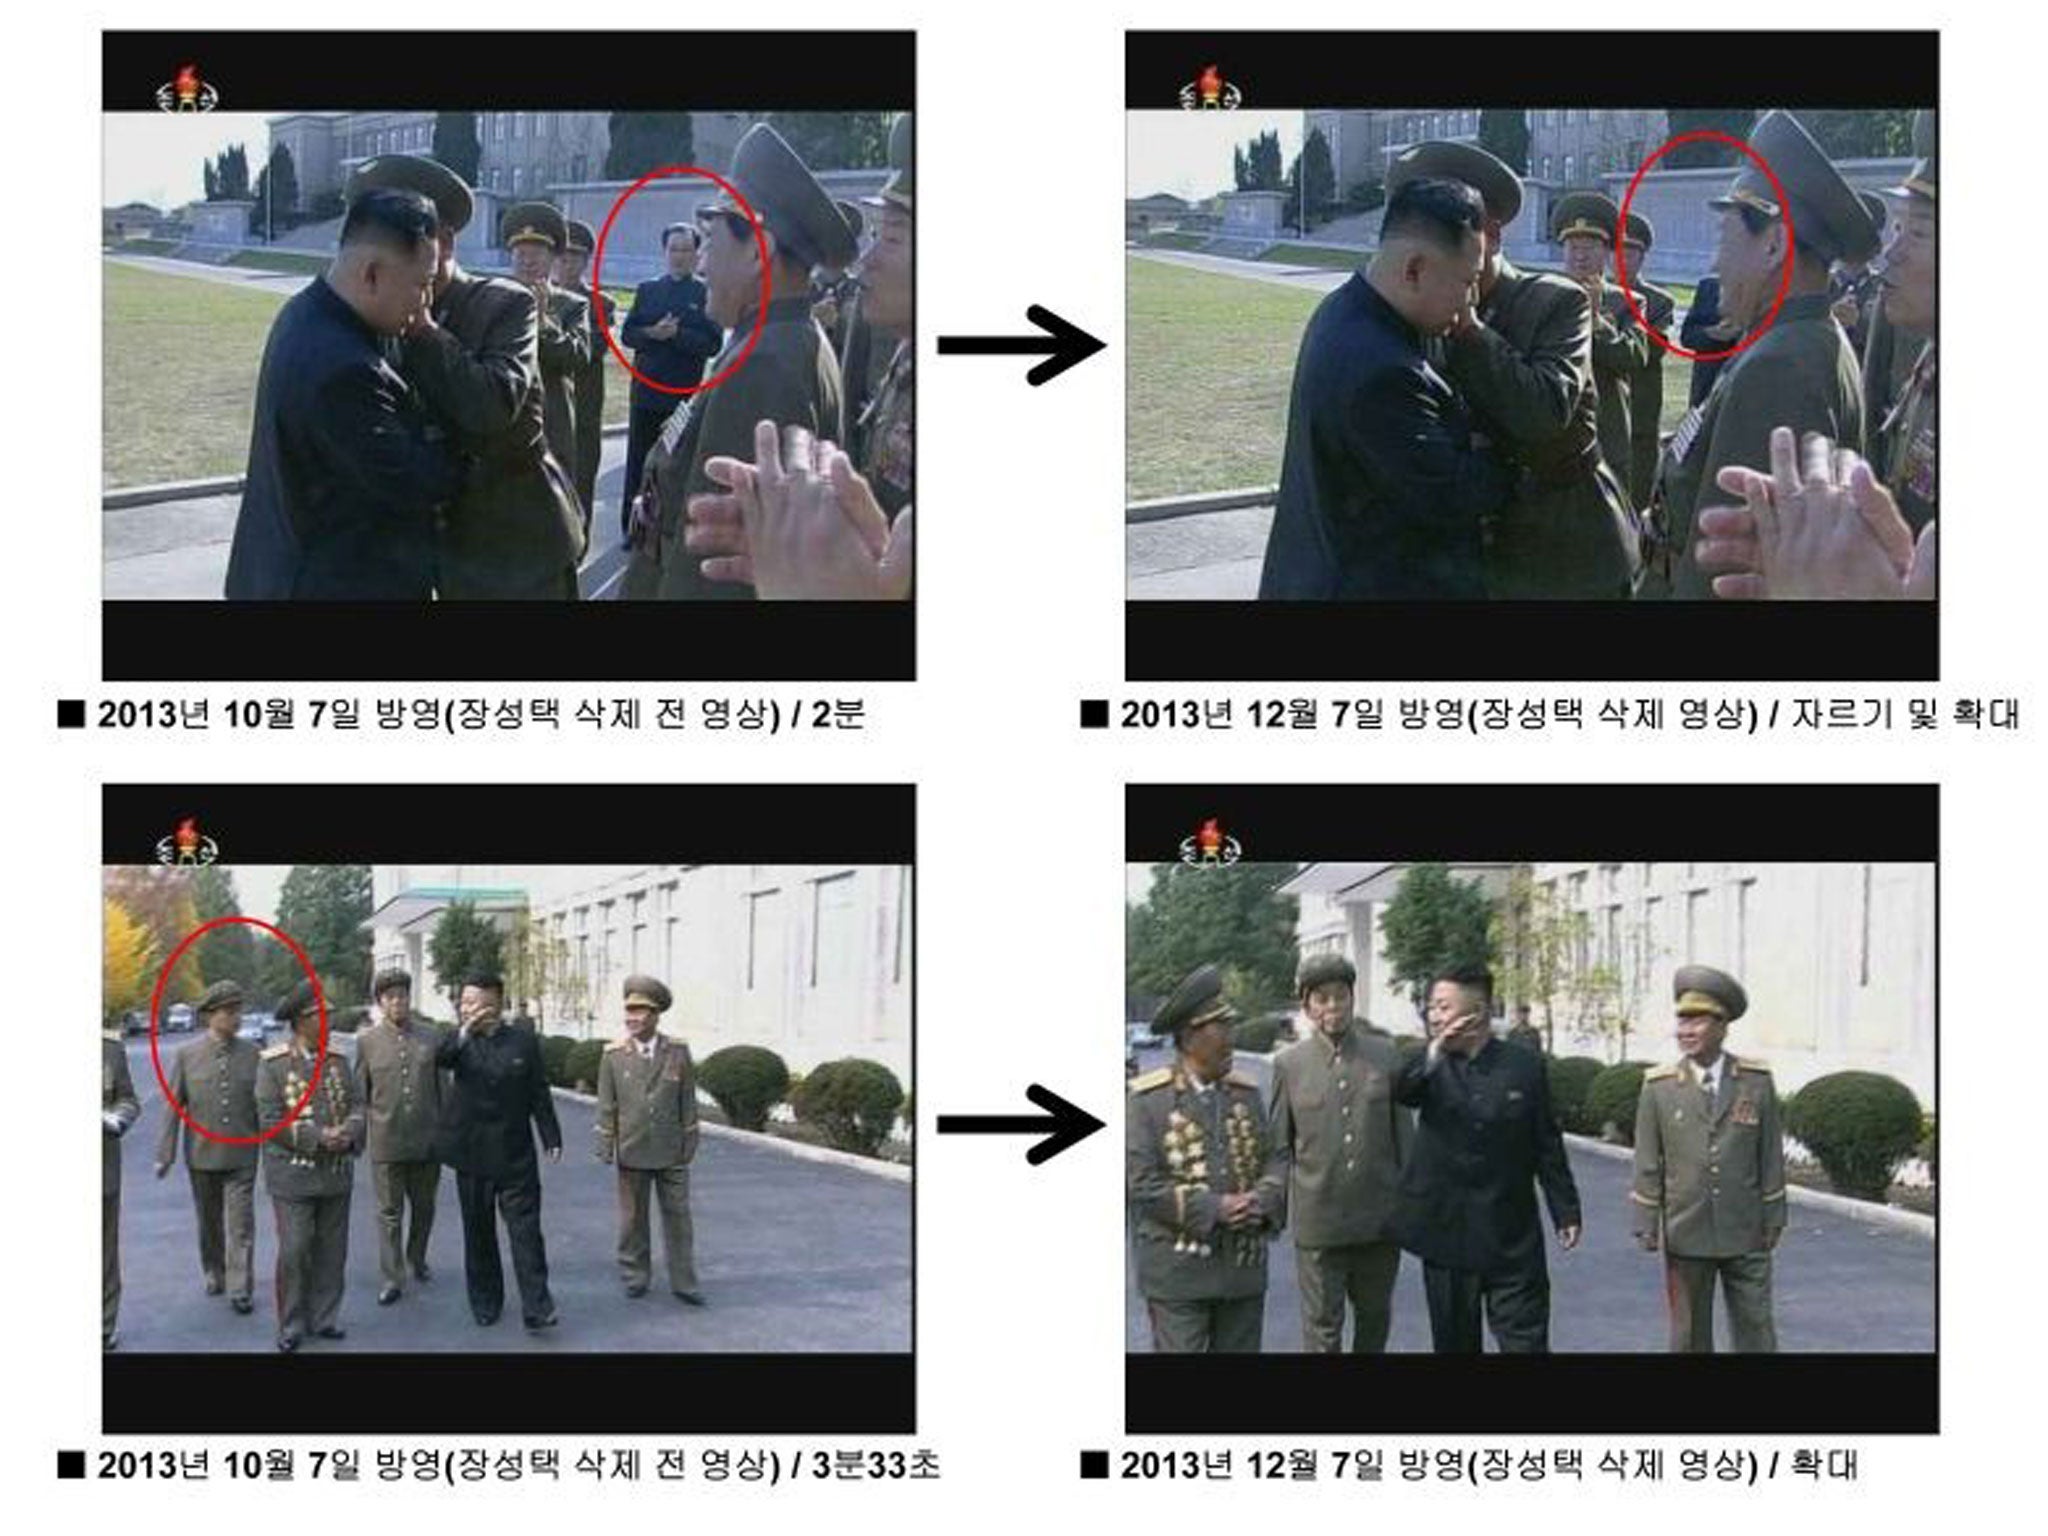 Film-makers cropped out the powerful uncle of North Korean leader Kim Jong-Un